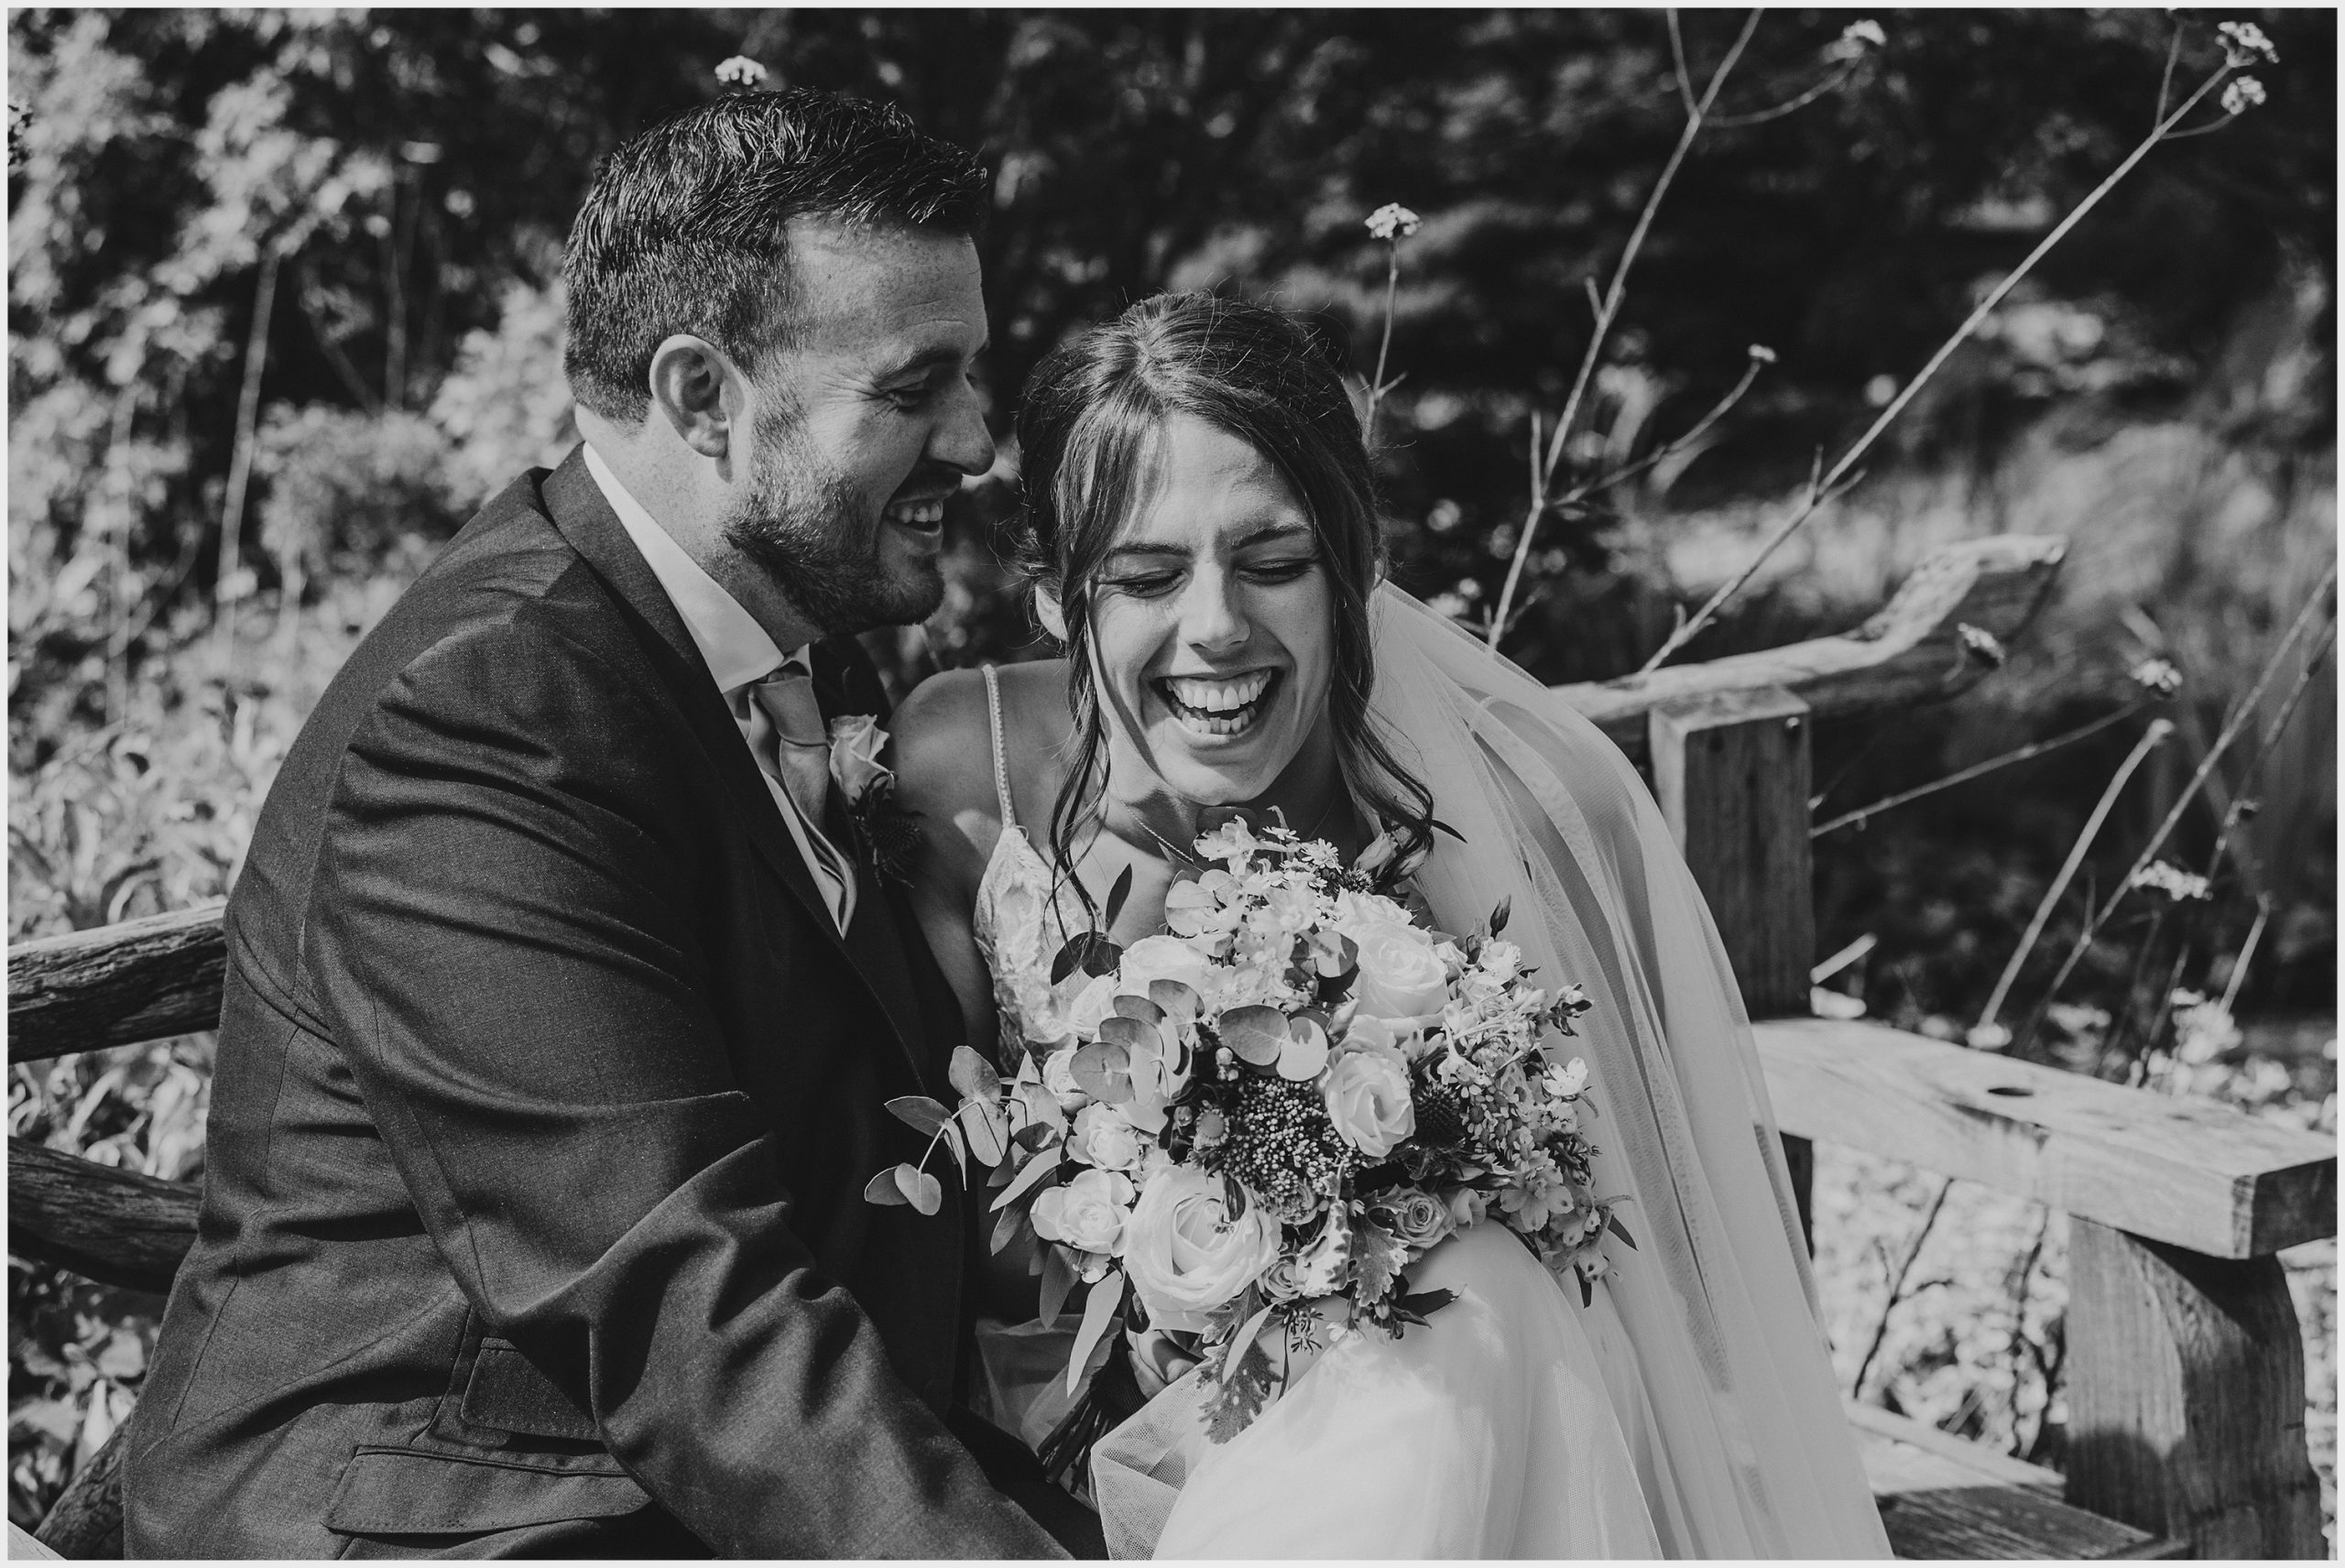 A bride bursts into laughter while sitting on a rustic bench in the Asian Gardens at The Grosvenor Pulford Hotel and Spa.  Image captured by Helena Jayne Photography a preferred supplier of the Grosvenor Pulford Hotel and Spa